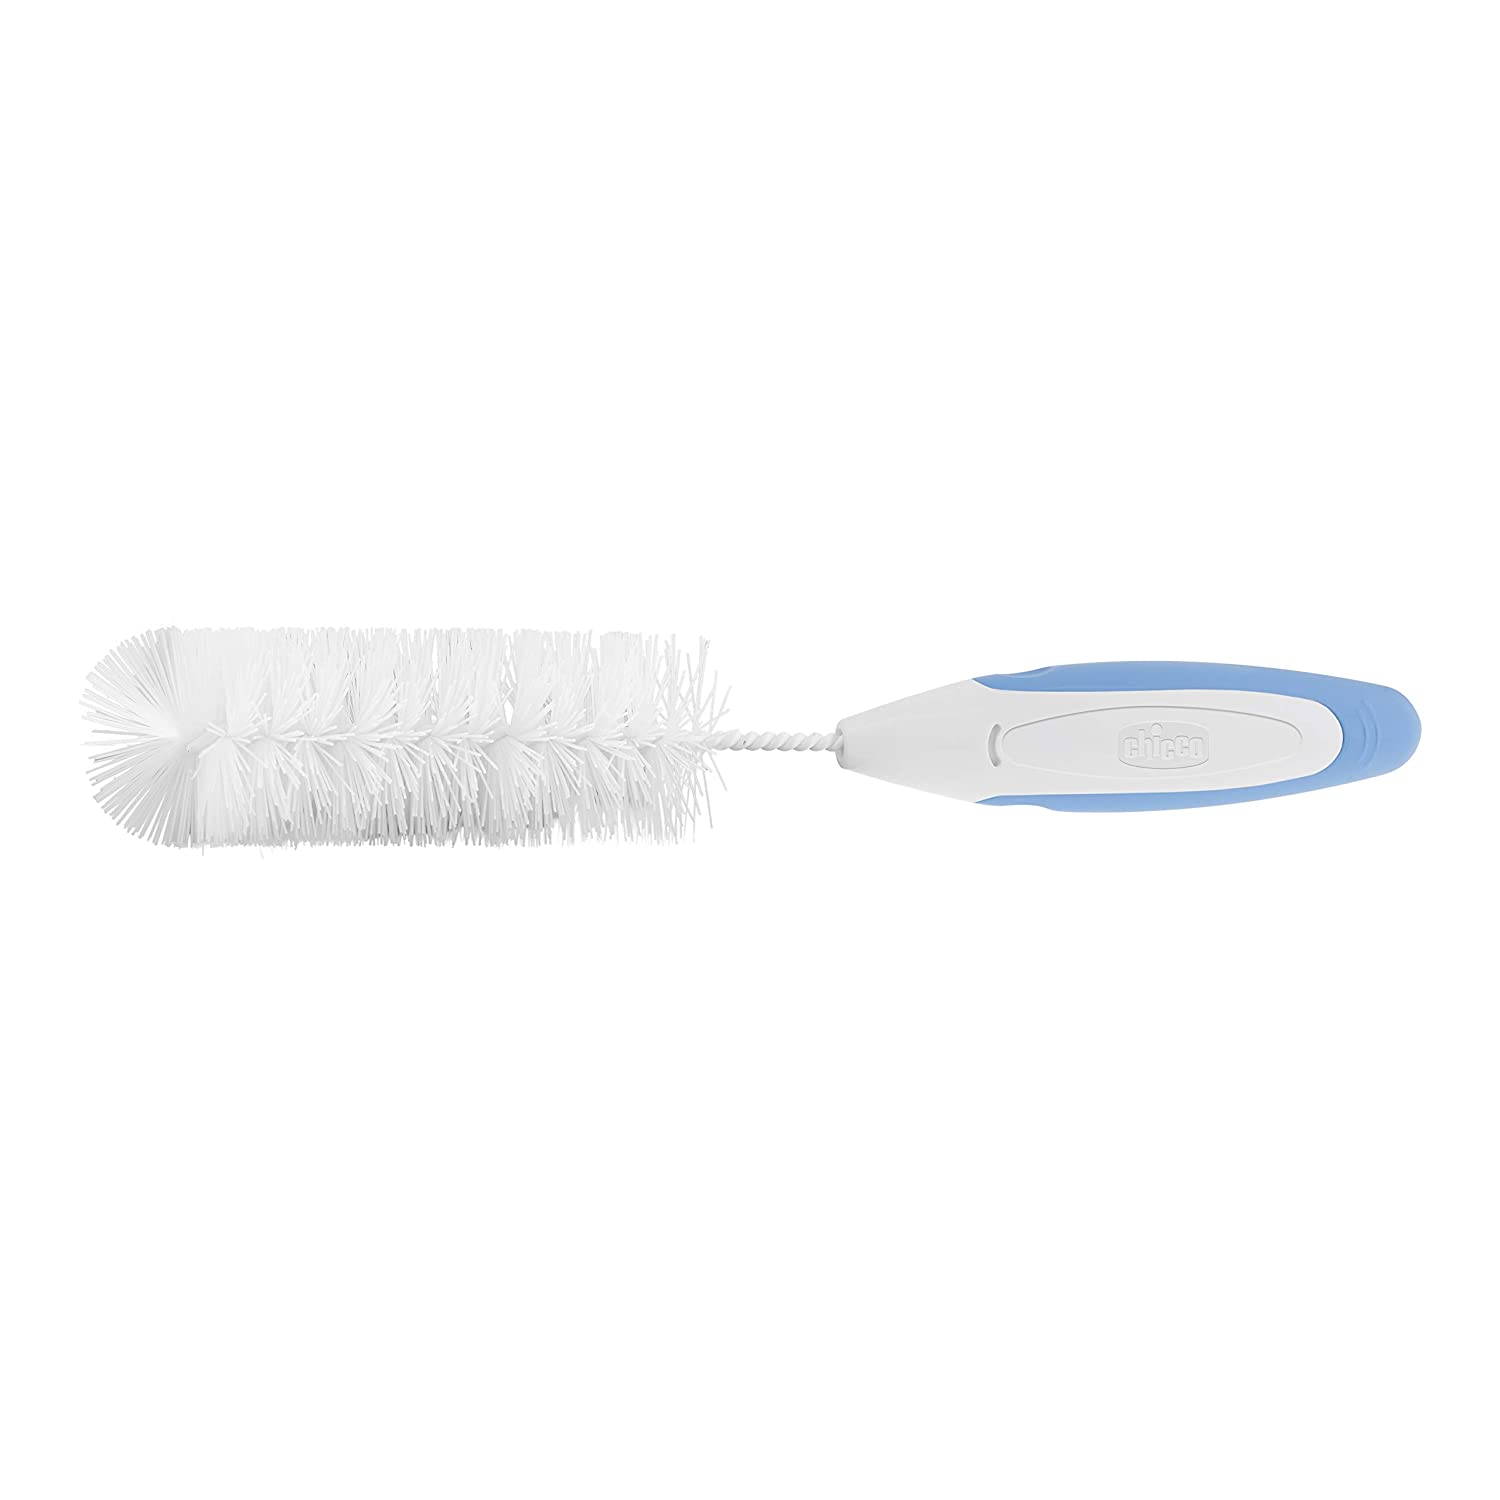 3in1 Bottle Brush by Chicco.